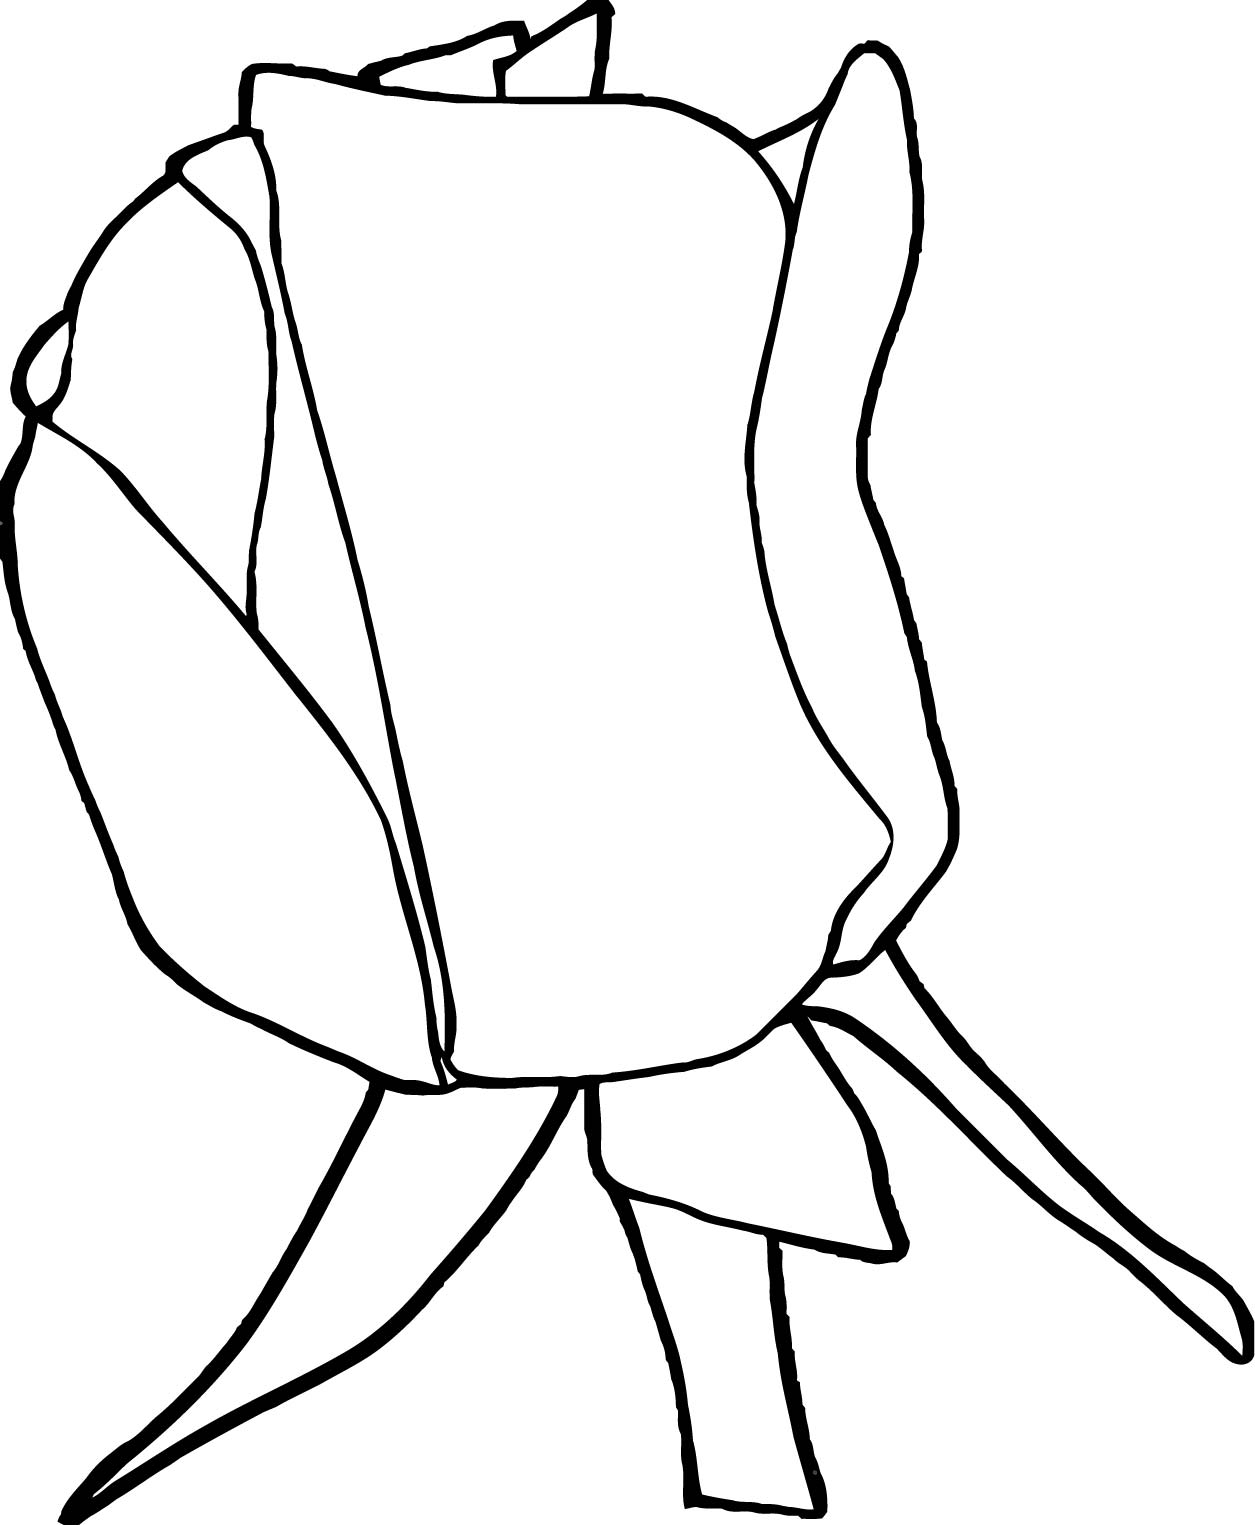 Rose Flower Coloring Page 138